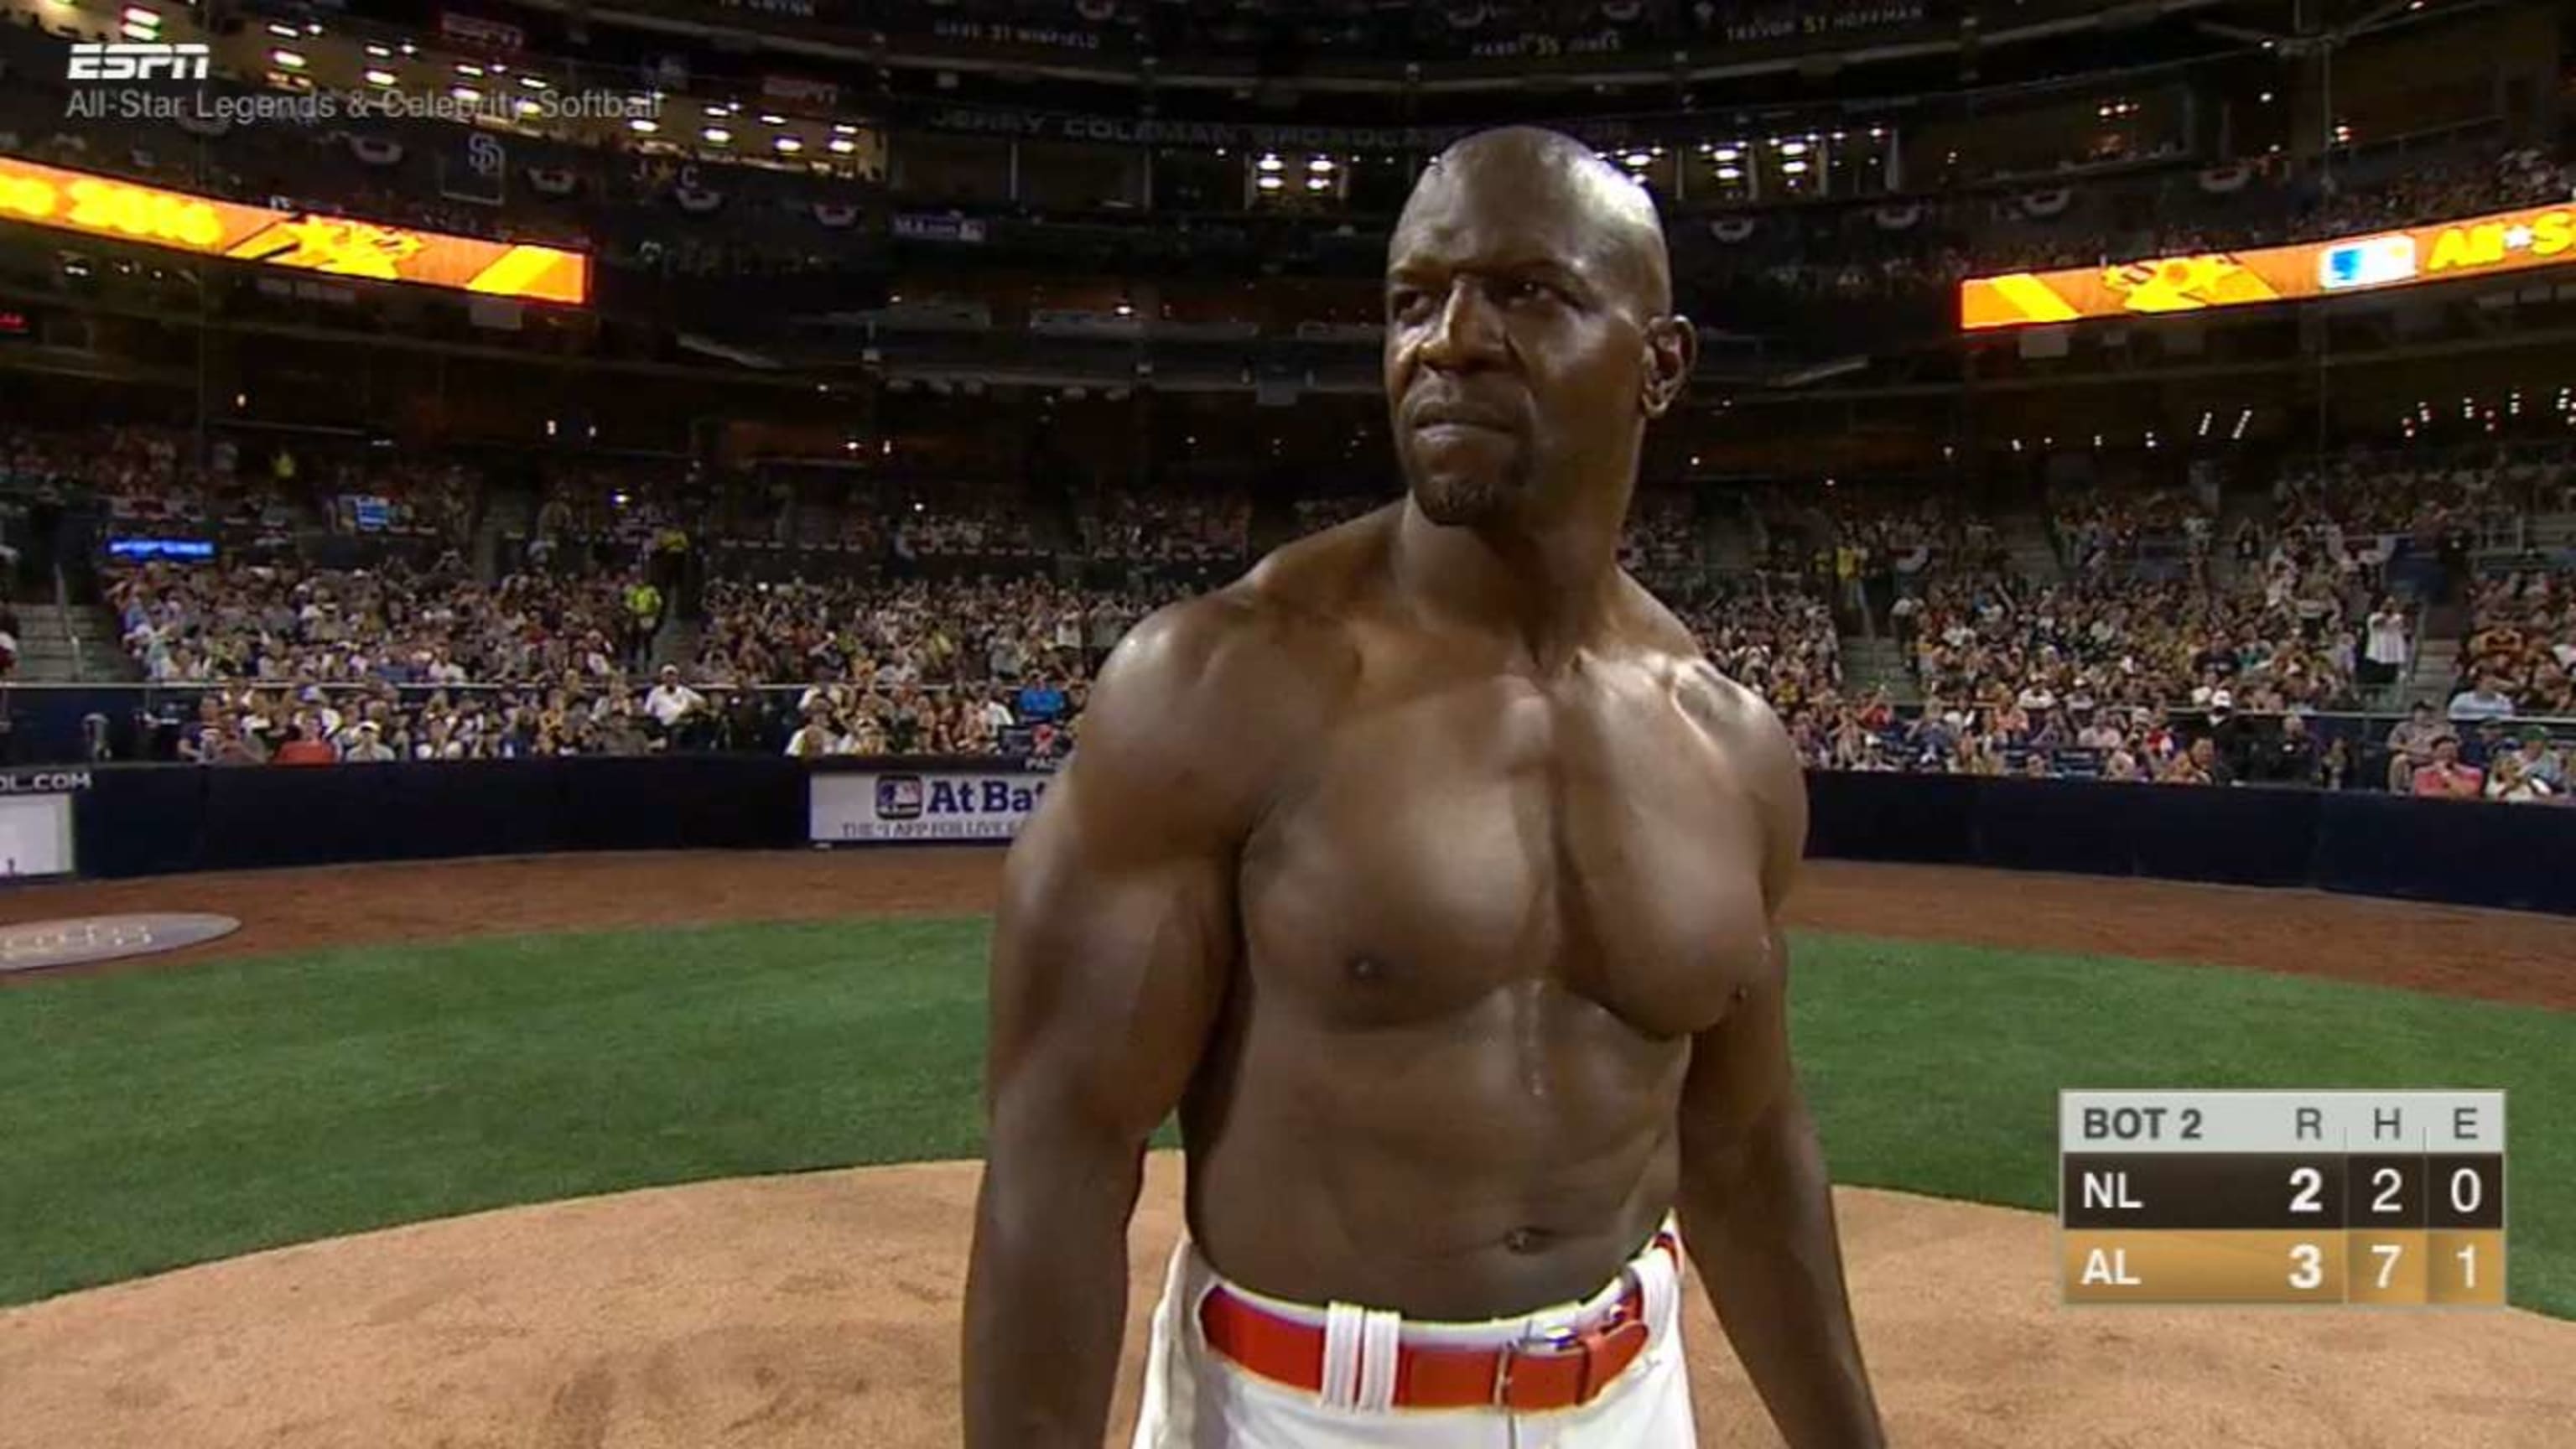 Terry Crews flexed his bare chest during the Celebrity Softball Game, then  he struck out